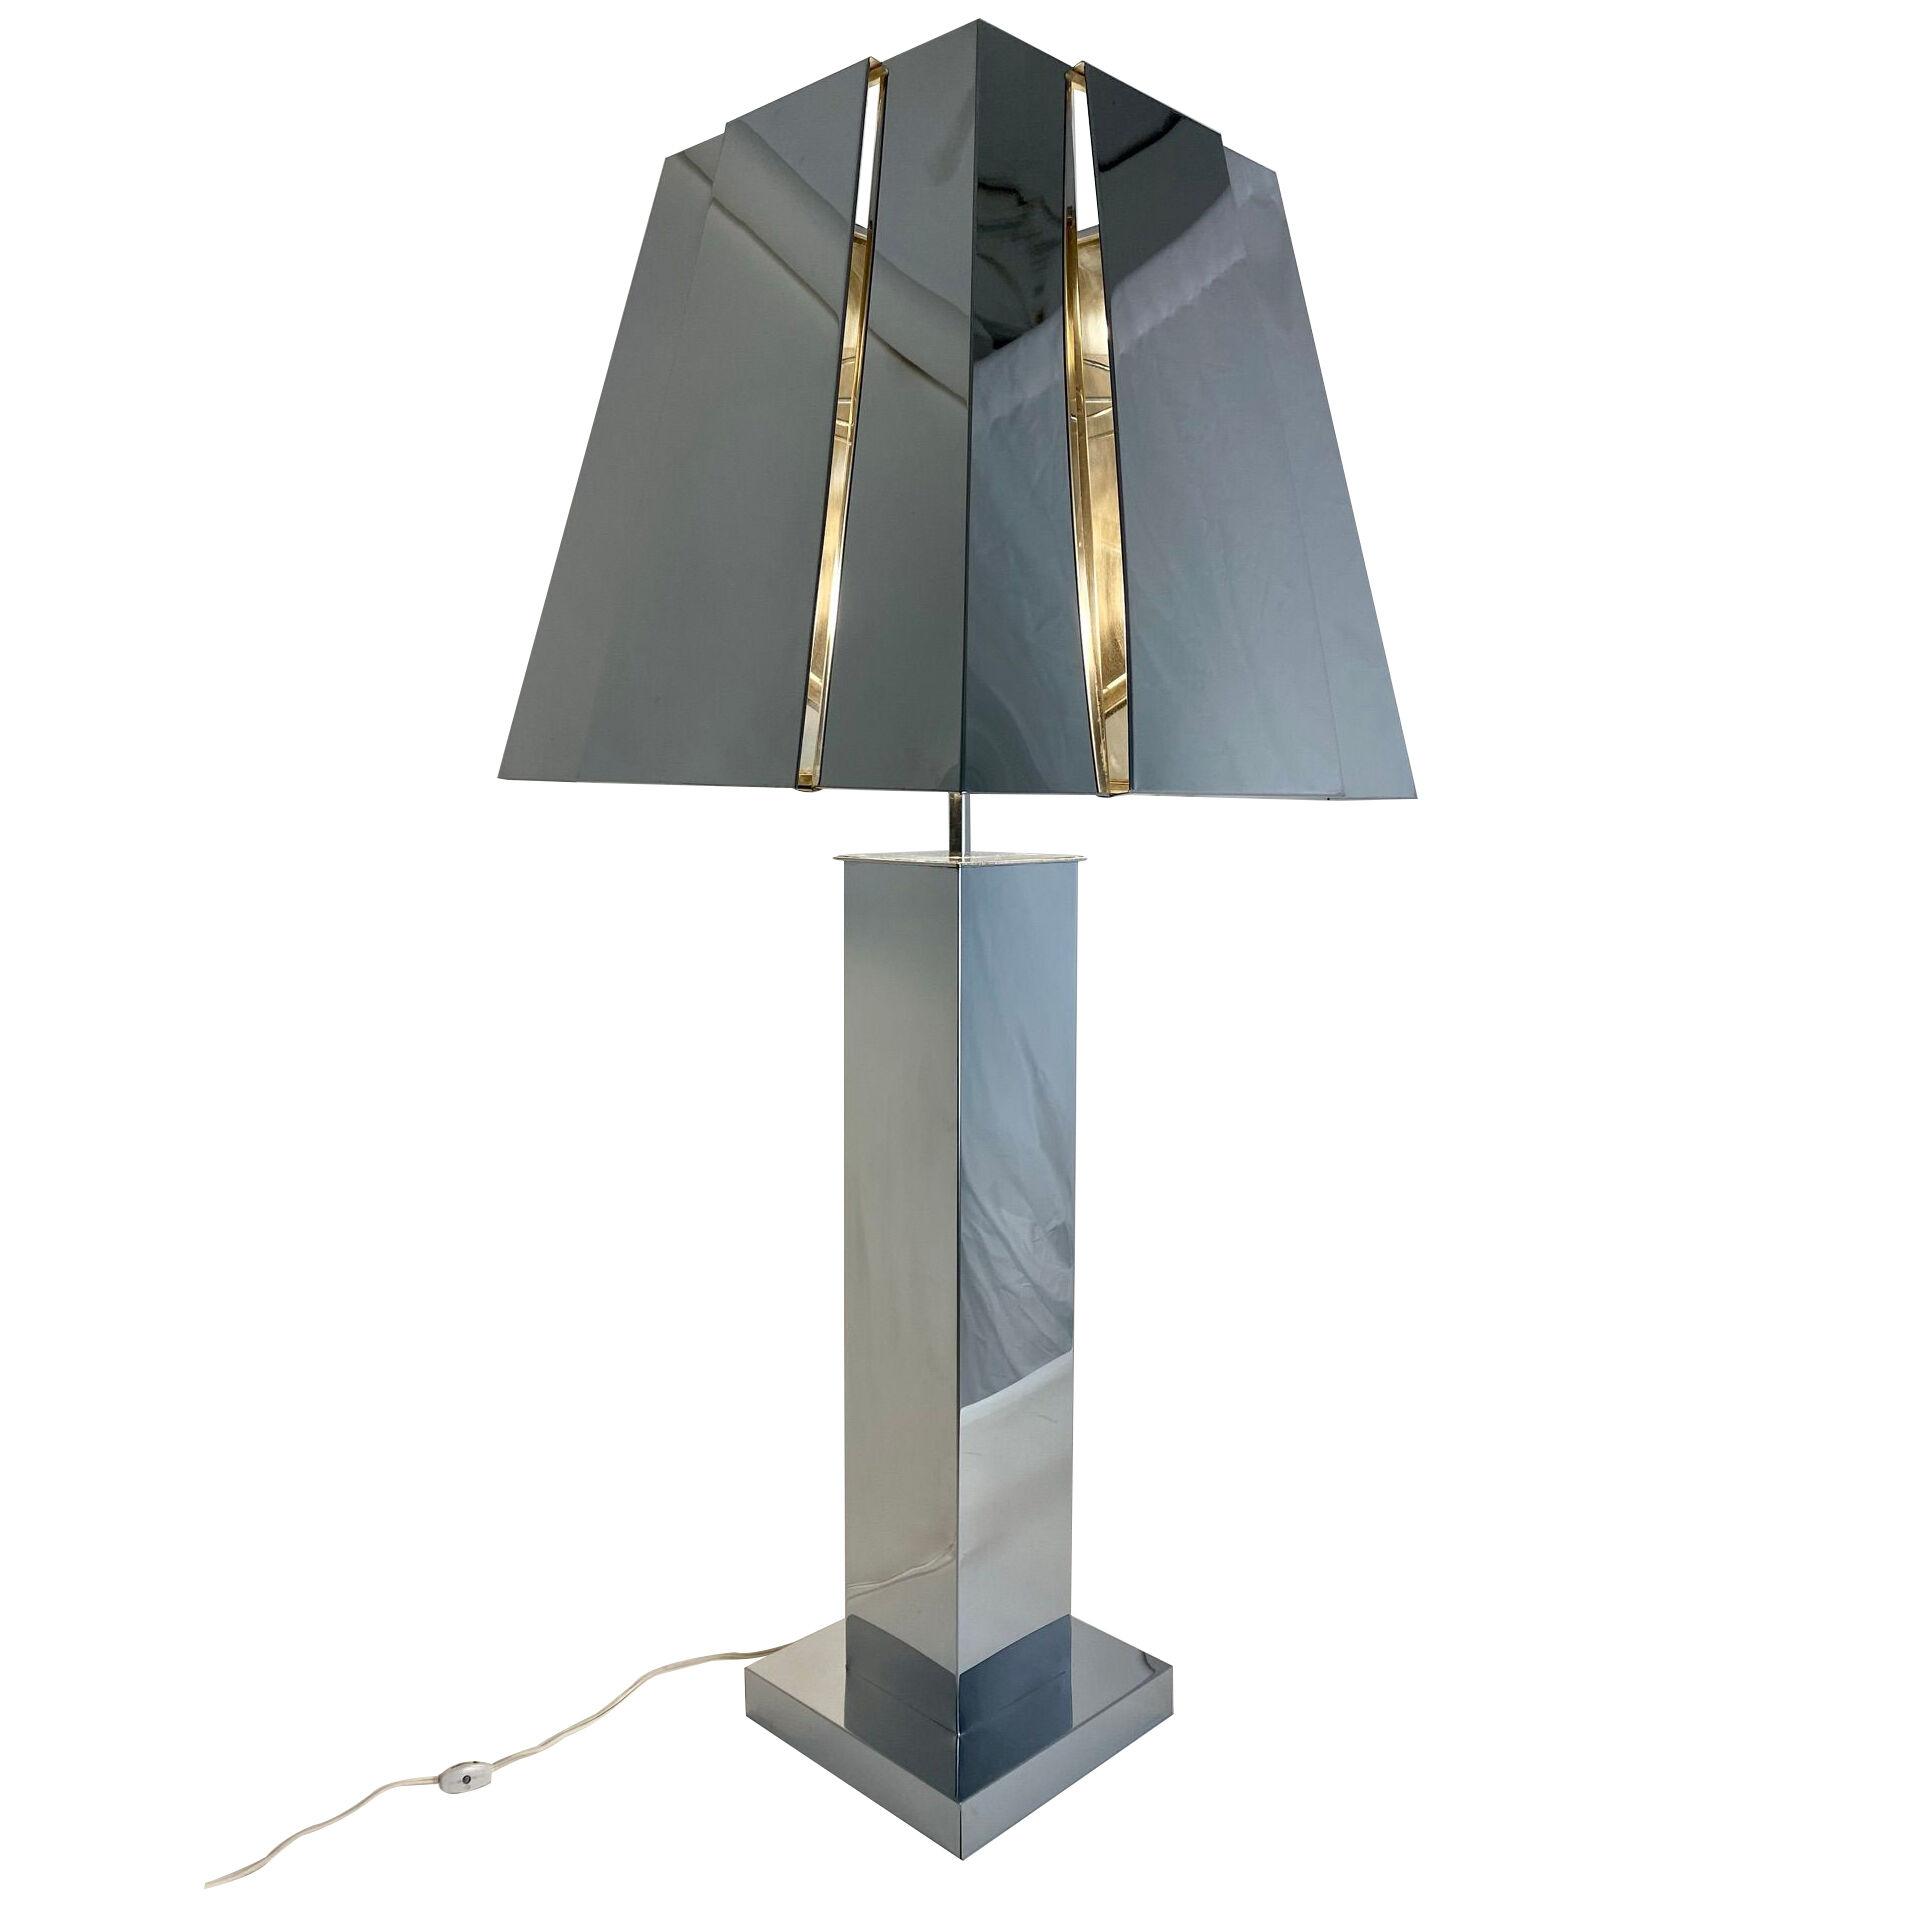 1976s Curtis Jere Sculptural Chrome Lamp and Shade, signed